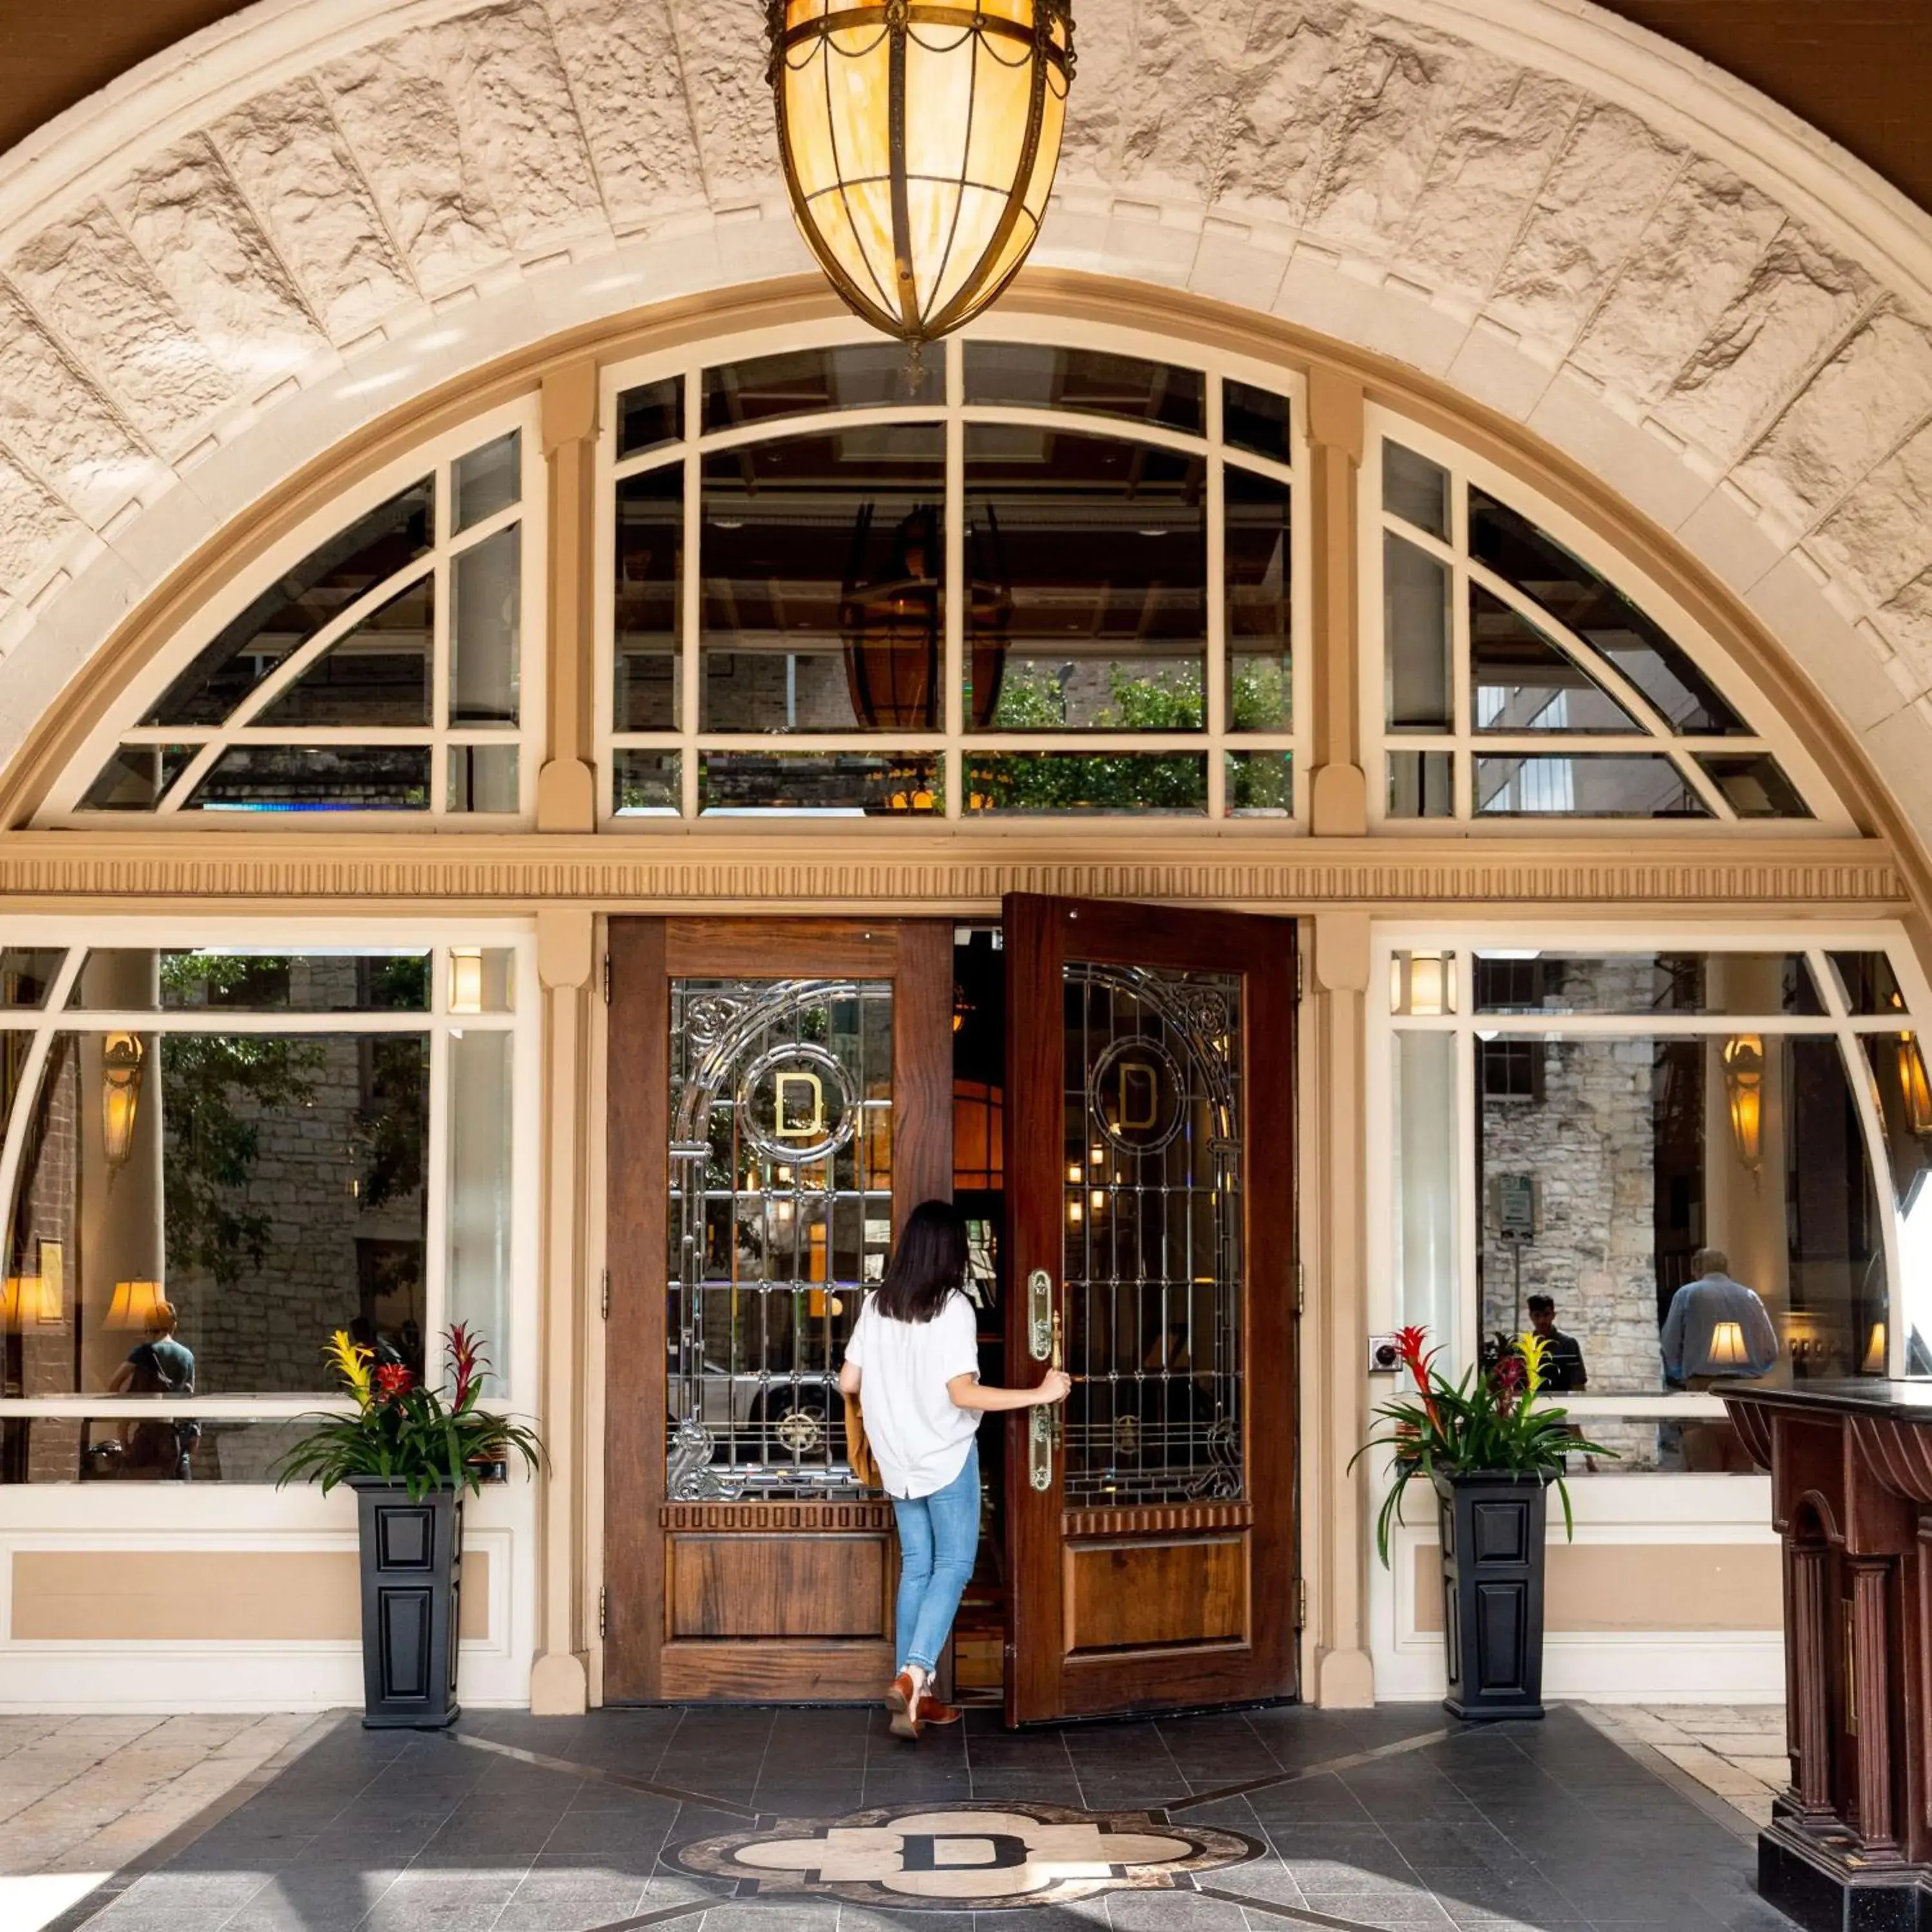 Facade/entrance in The Driskill, in The Unbound Collection by Hyatt